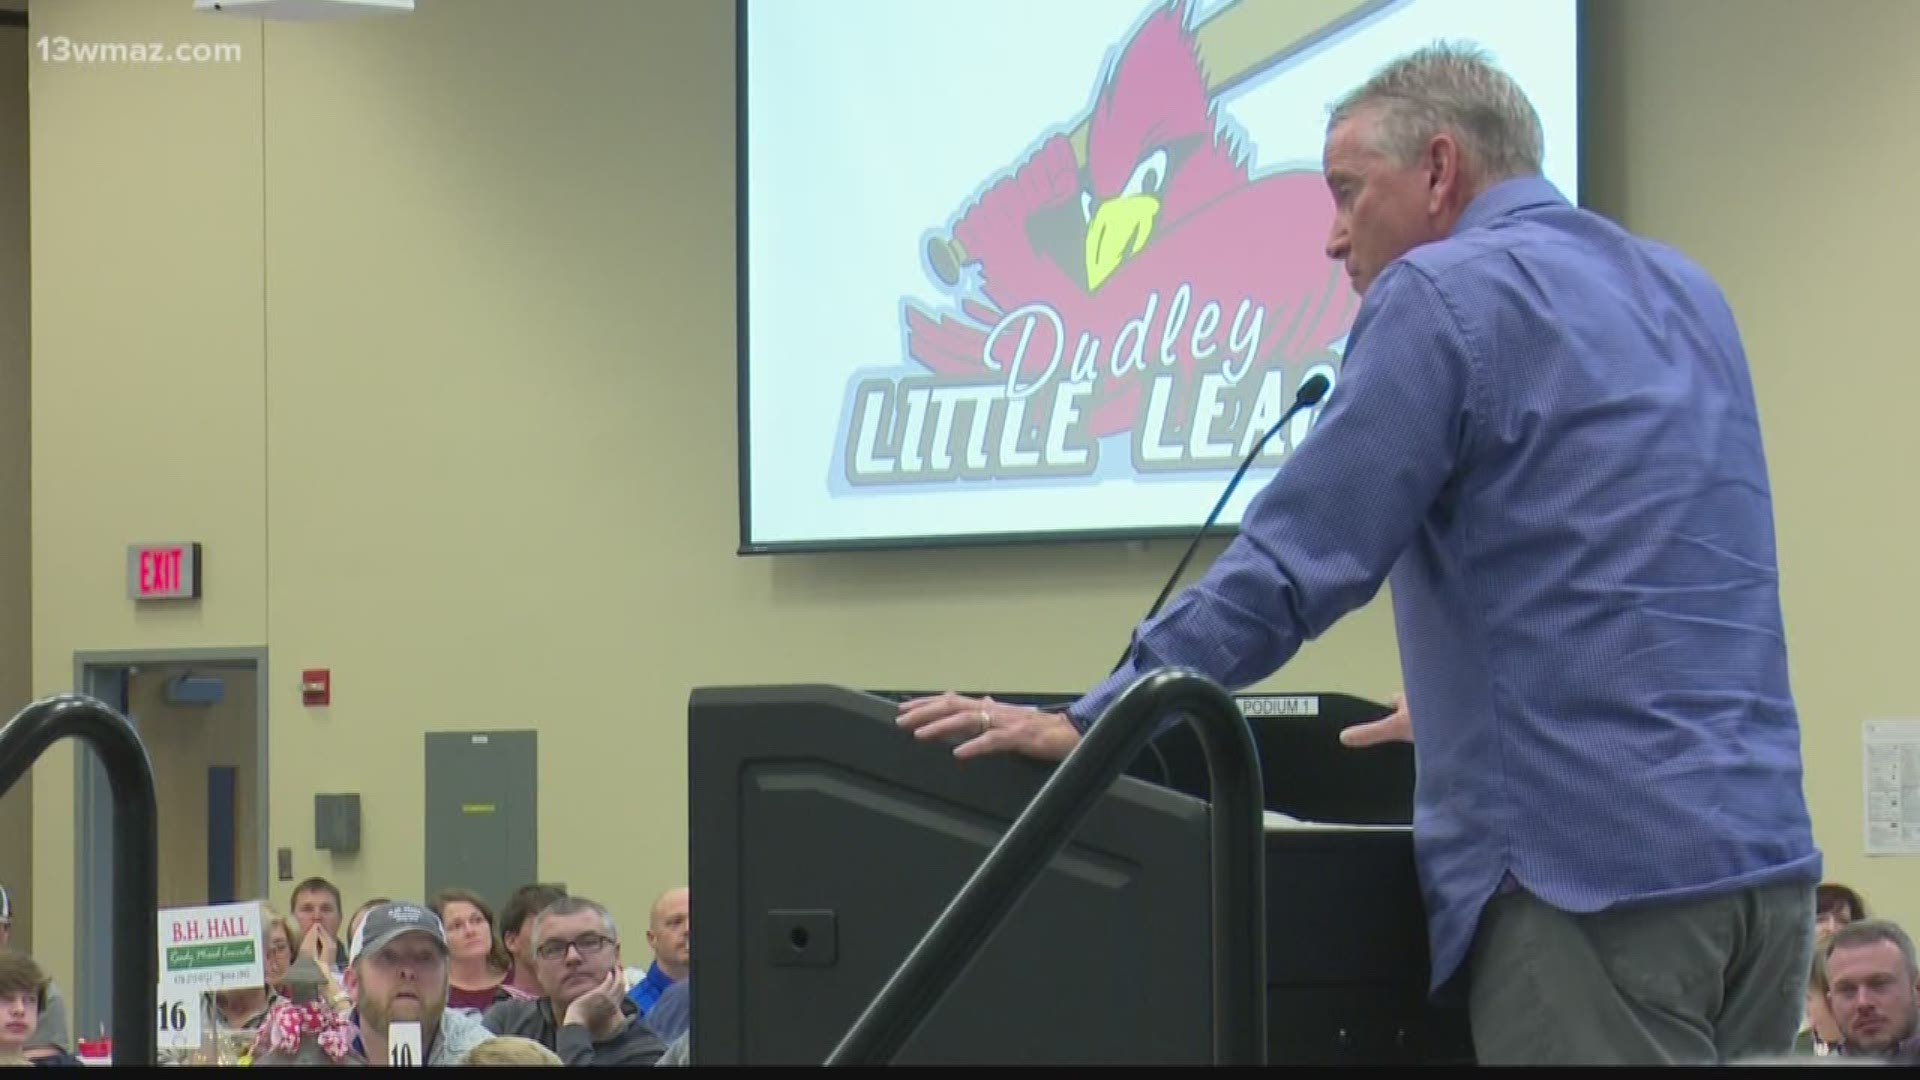 The Dudley Little League held their First Pitch fundraiser dinner in Dublin Tuesday, and the keynote speaker was Hall of Fame pitcher Tom Glavine.